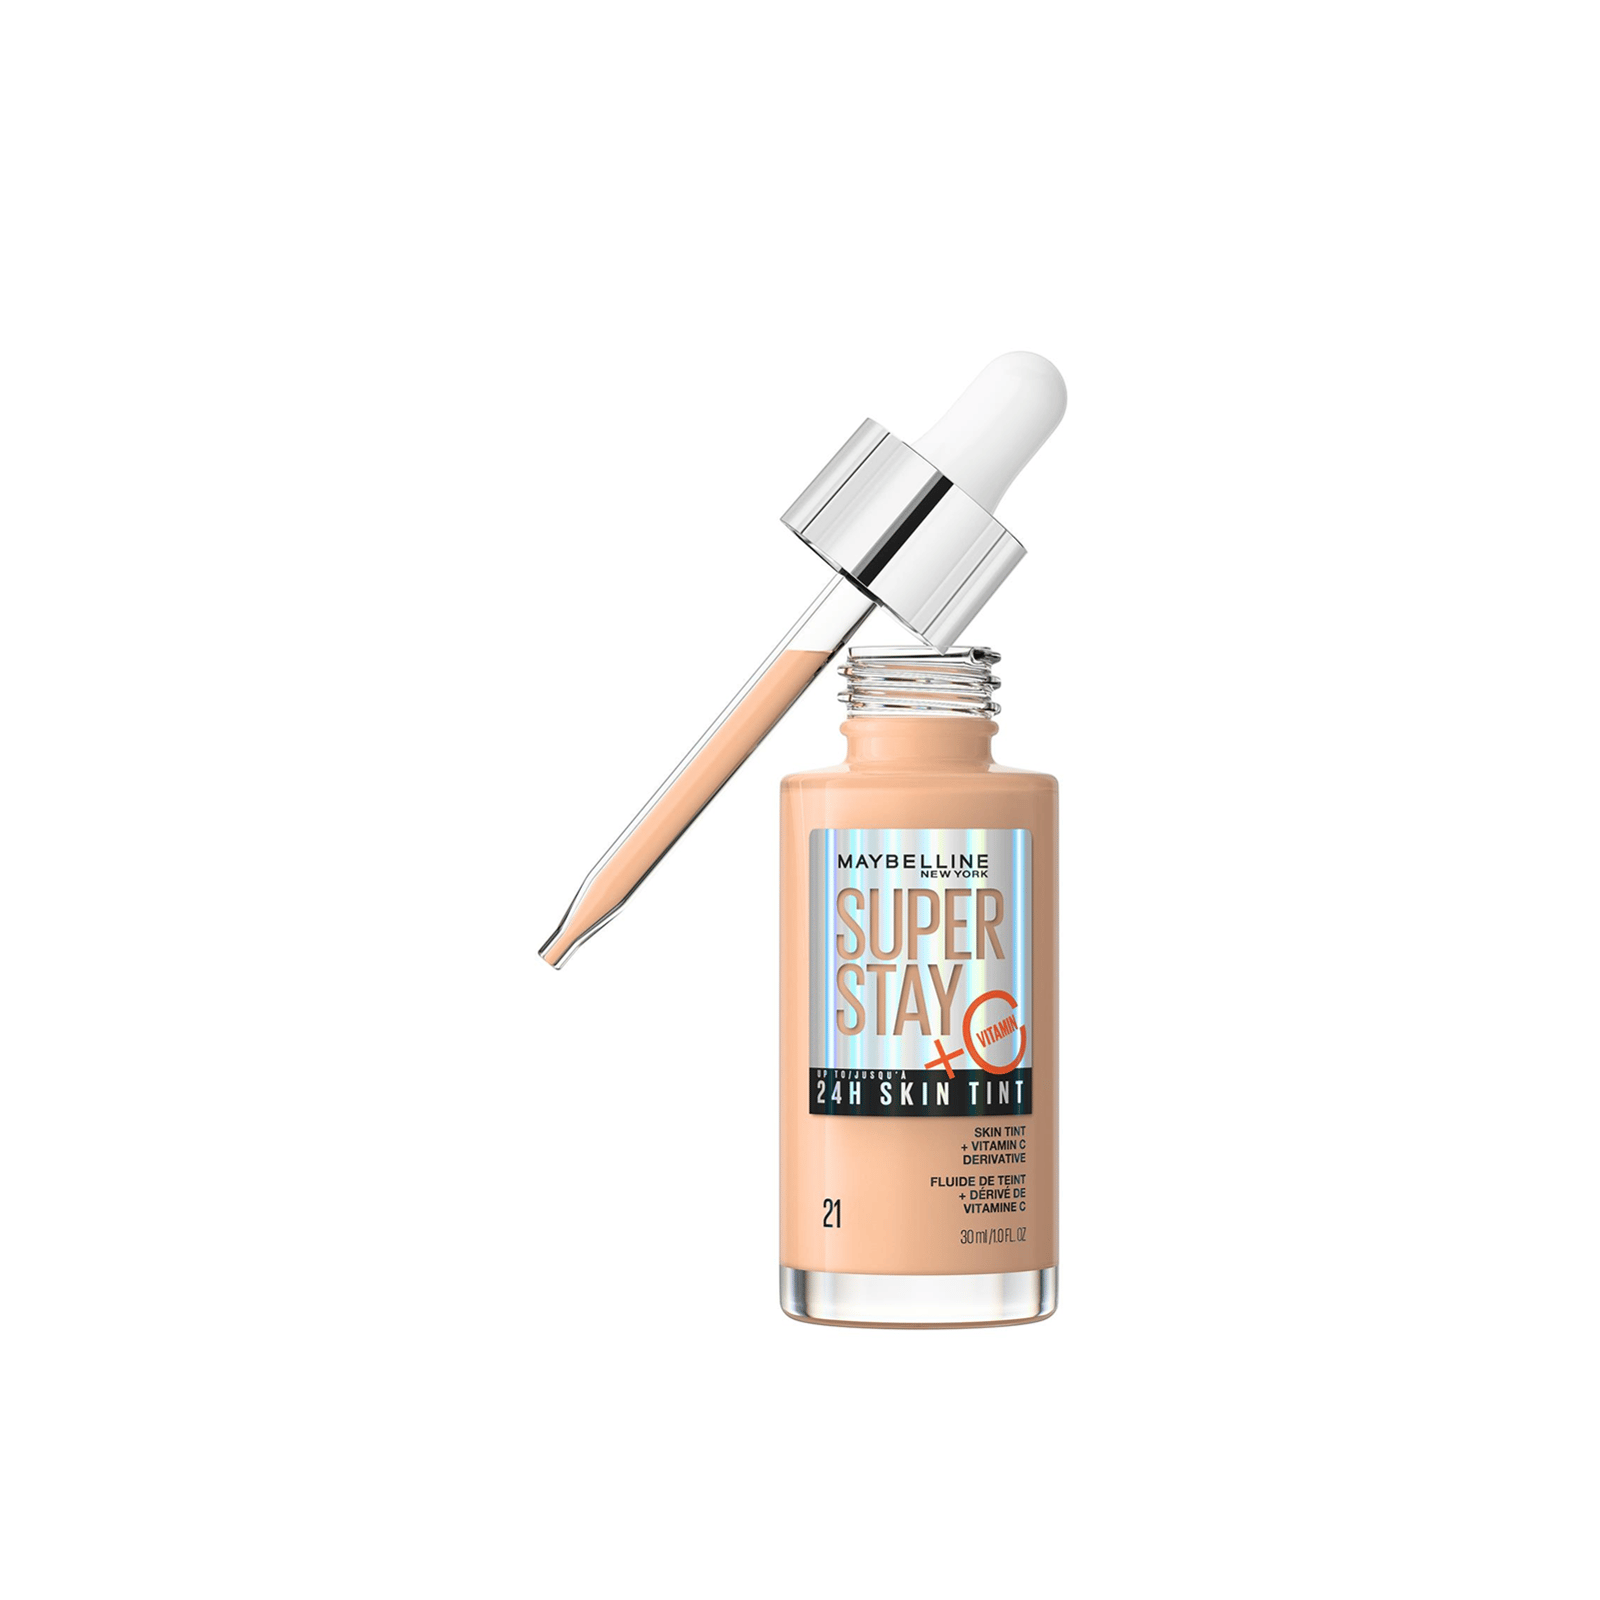 Buy Maybelline Super Stay 24H Skin Tint Foundation 21 30ml